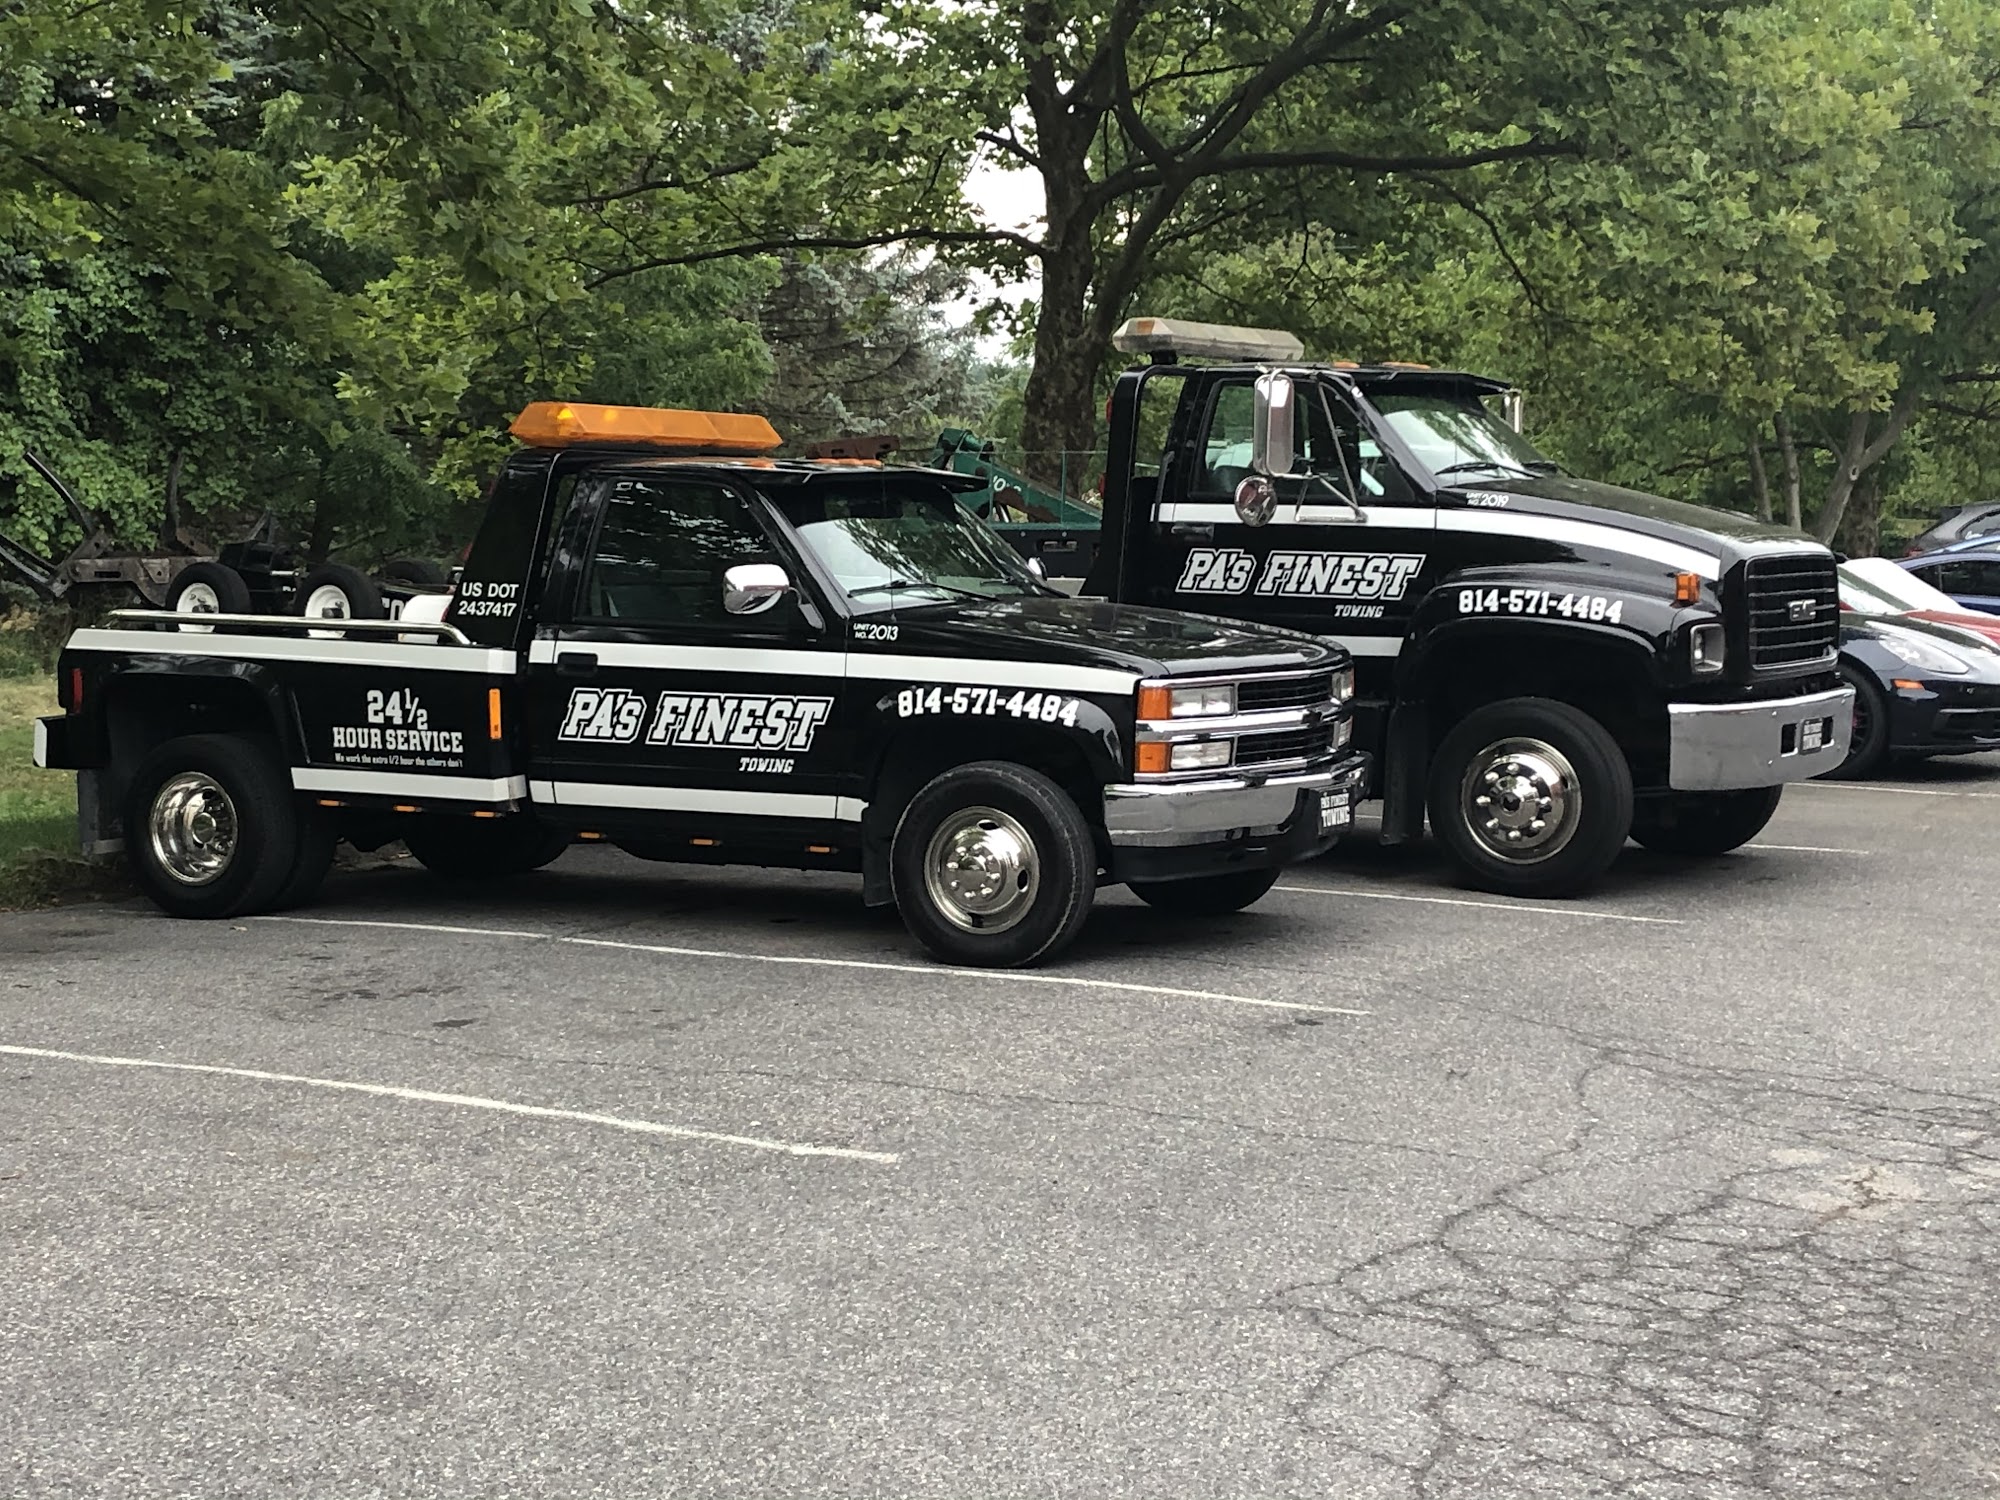 PA’s Finest Towing